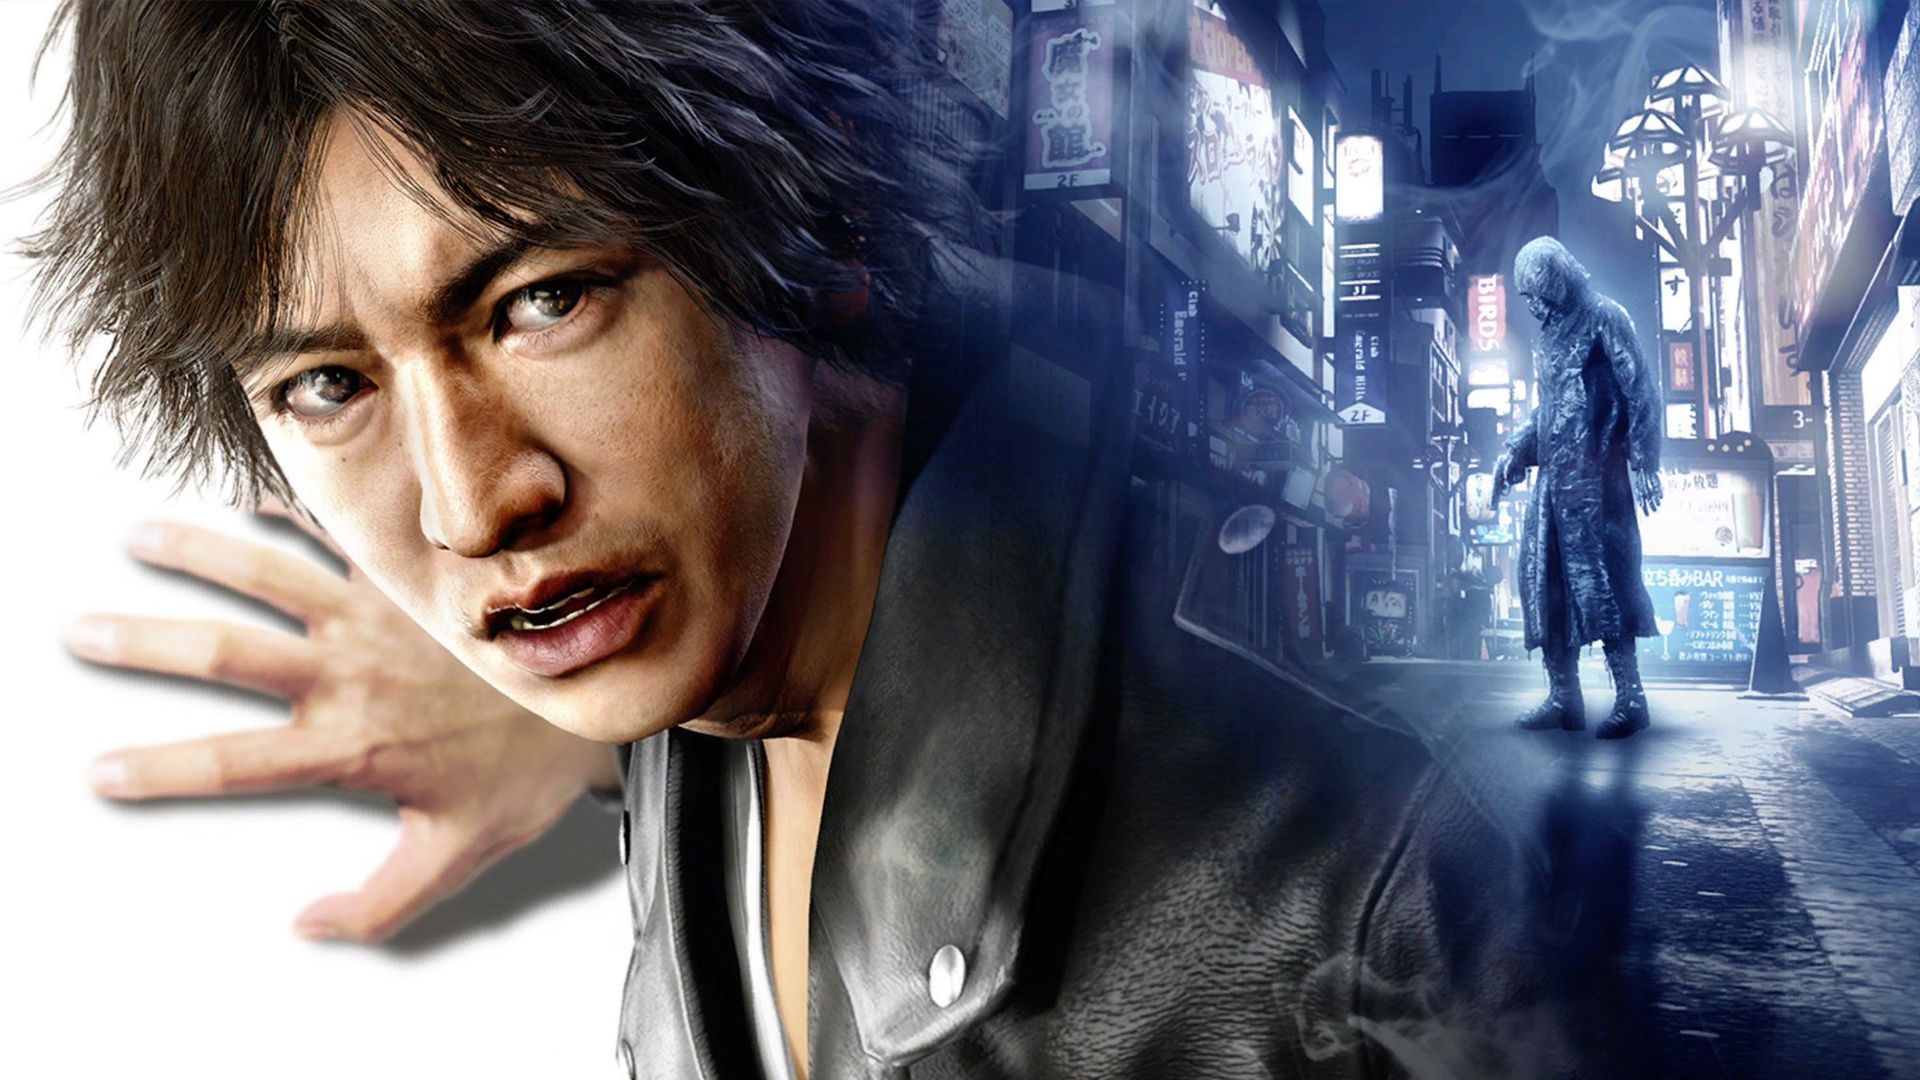 Judgment Review